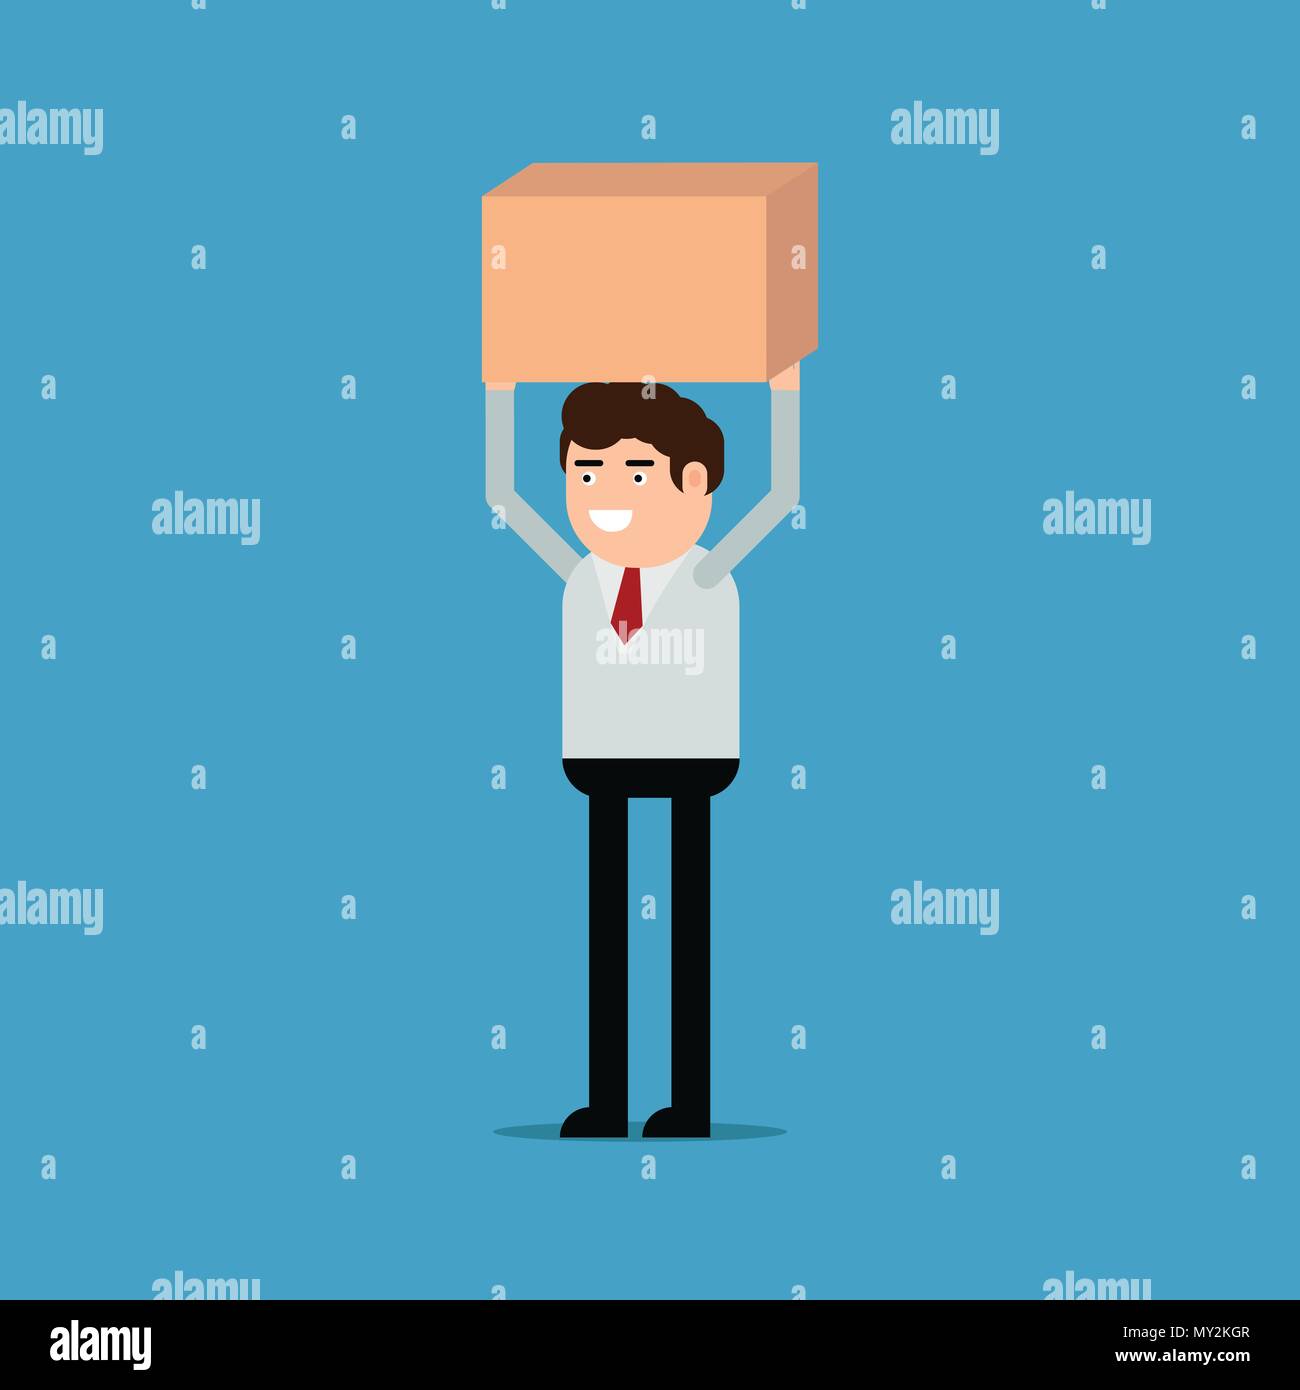 Businessman is carrying a box, vector illustration on a blue background Stock Vector